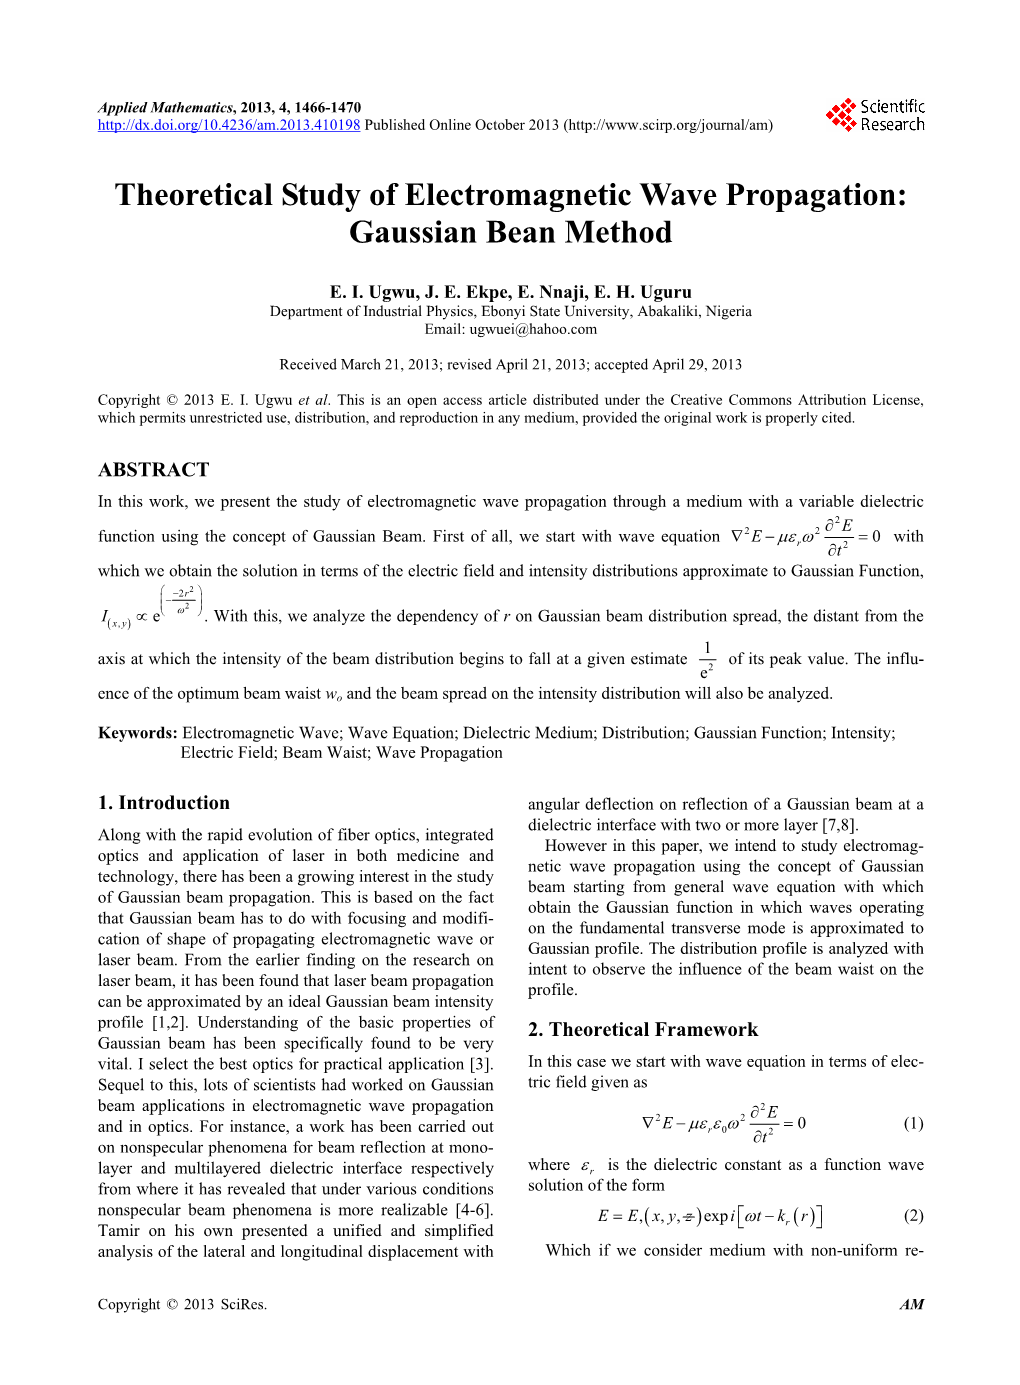 Theoretical Study of Electromagnetic Wave Propagation: Gaussian Bean Method